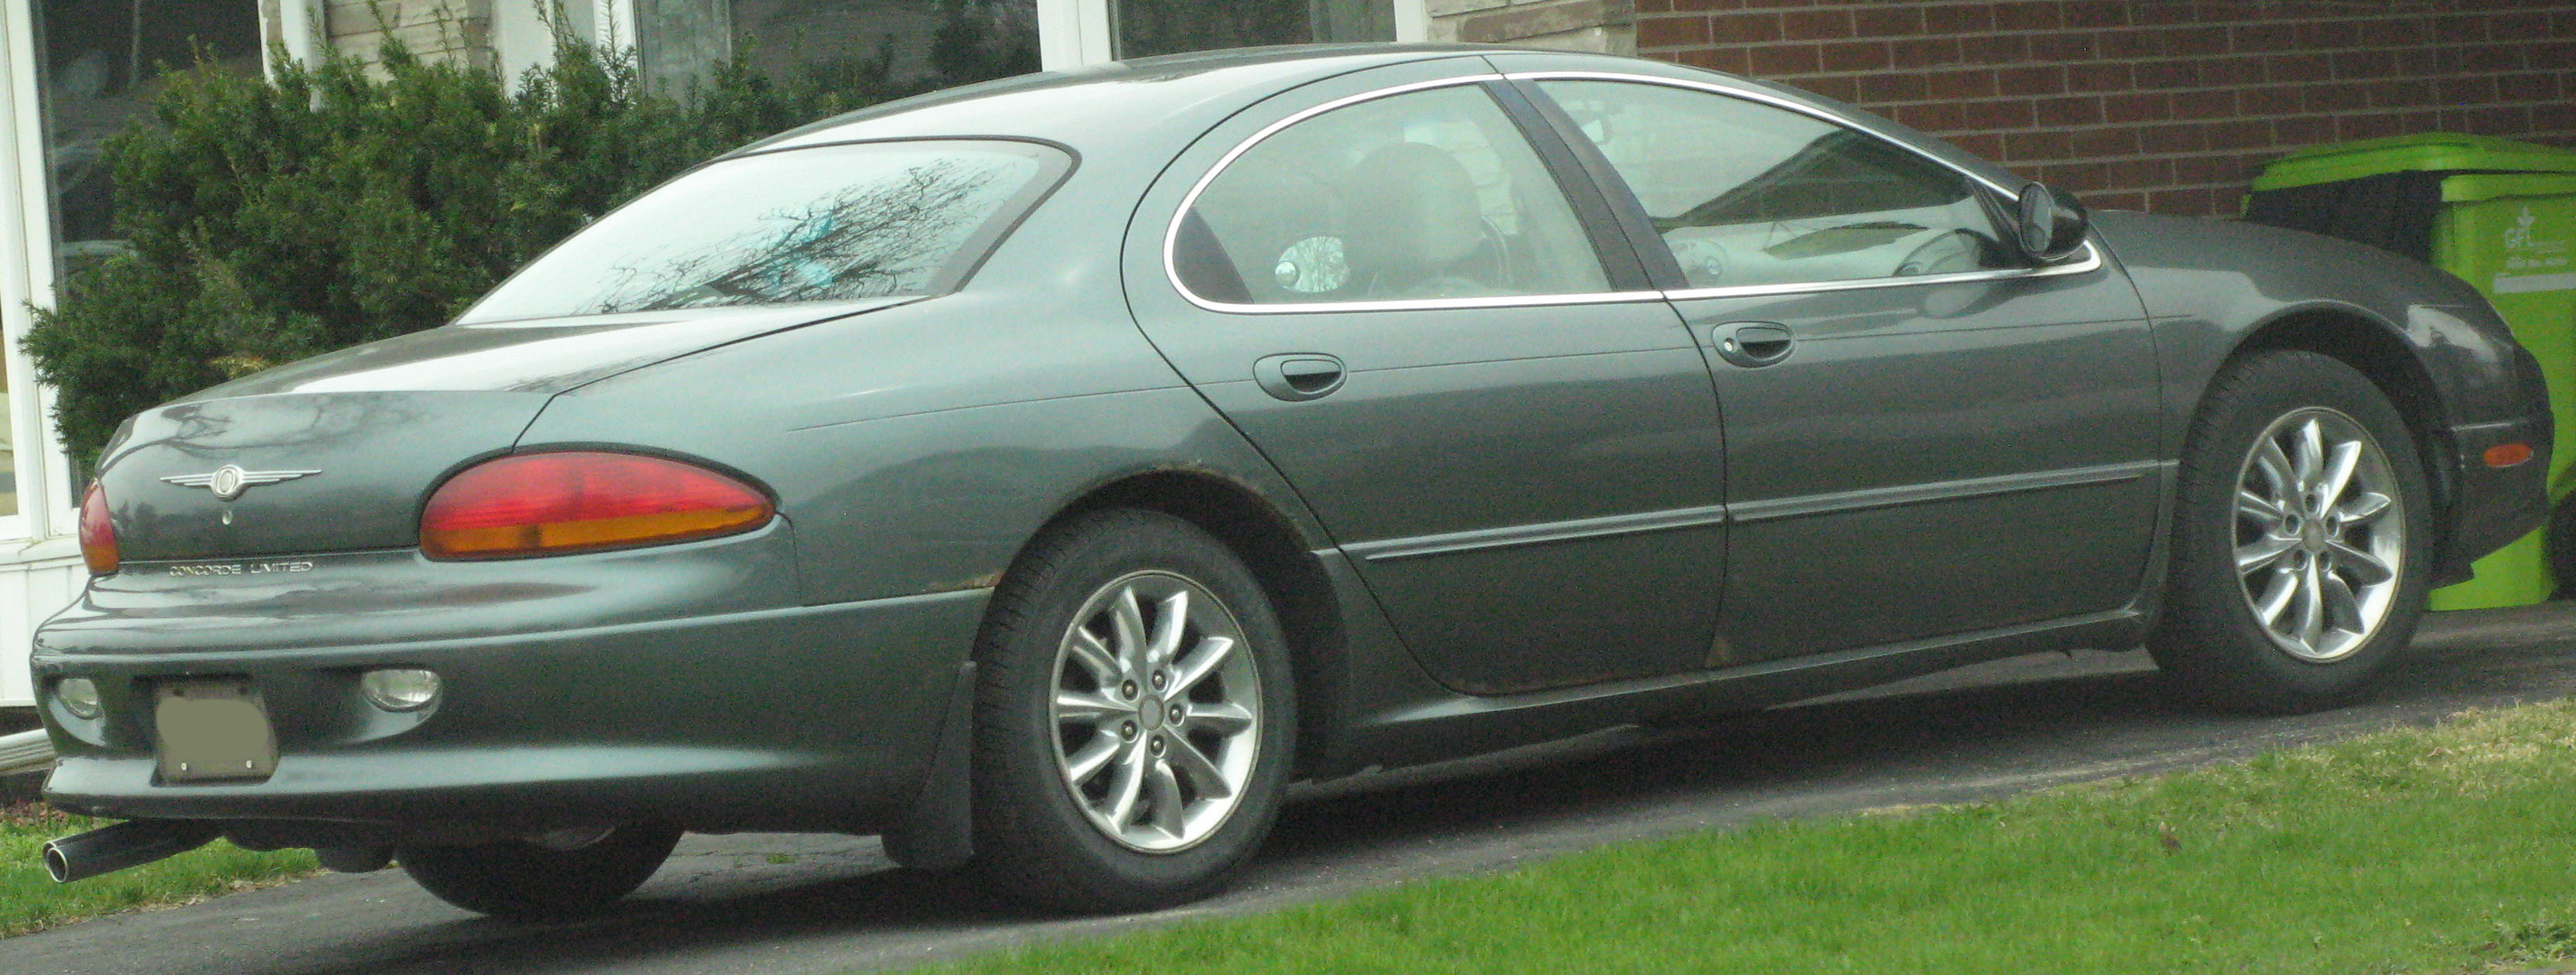 File:2002 Chrysler Concorde Limited, Rear Right, 05-18-2020.jpg - Wikimedia  Commons